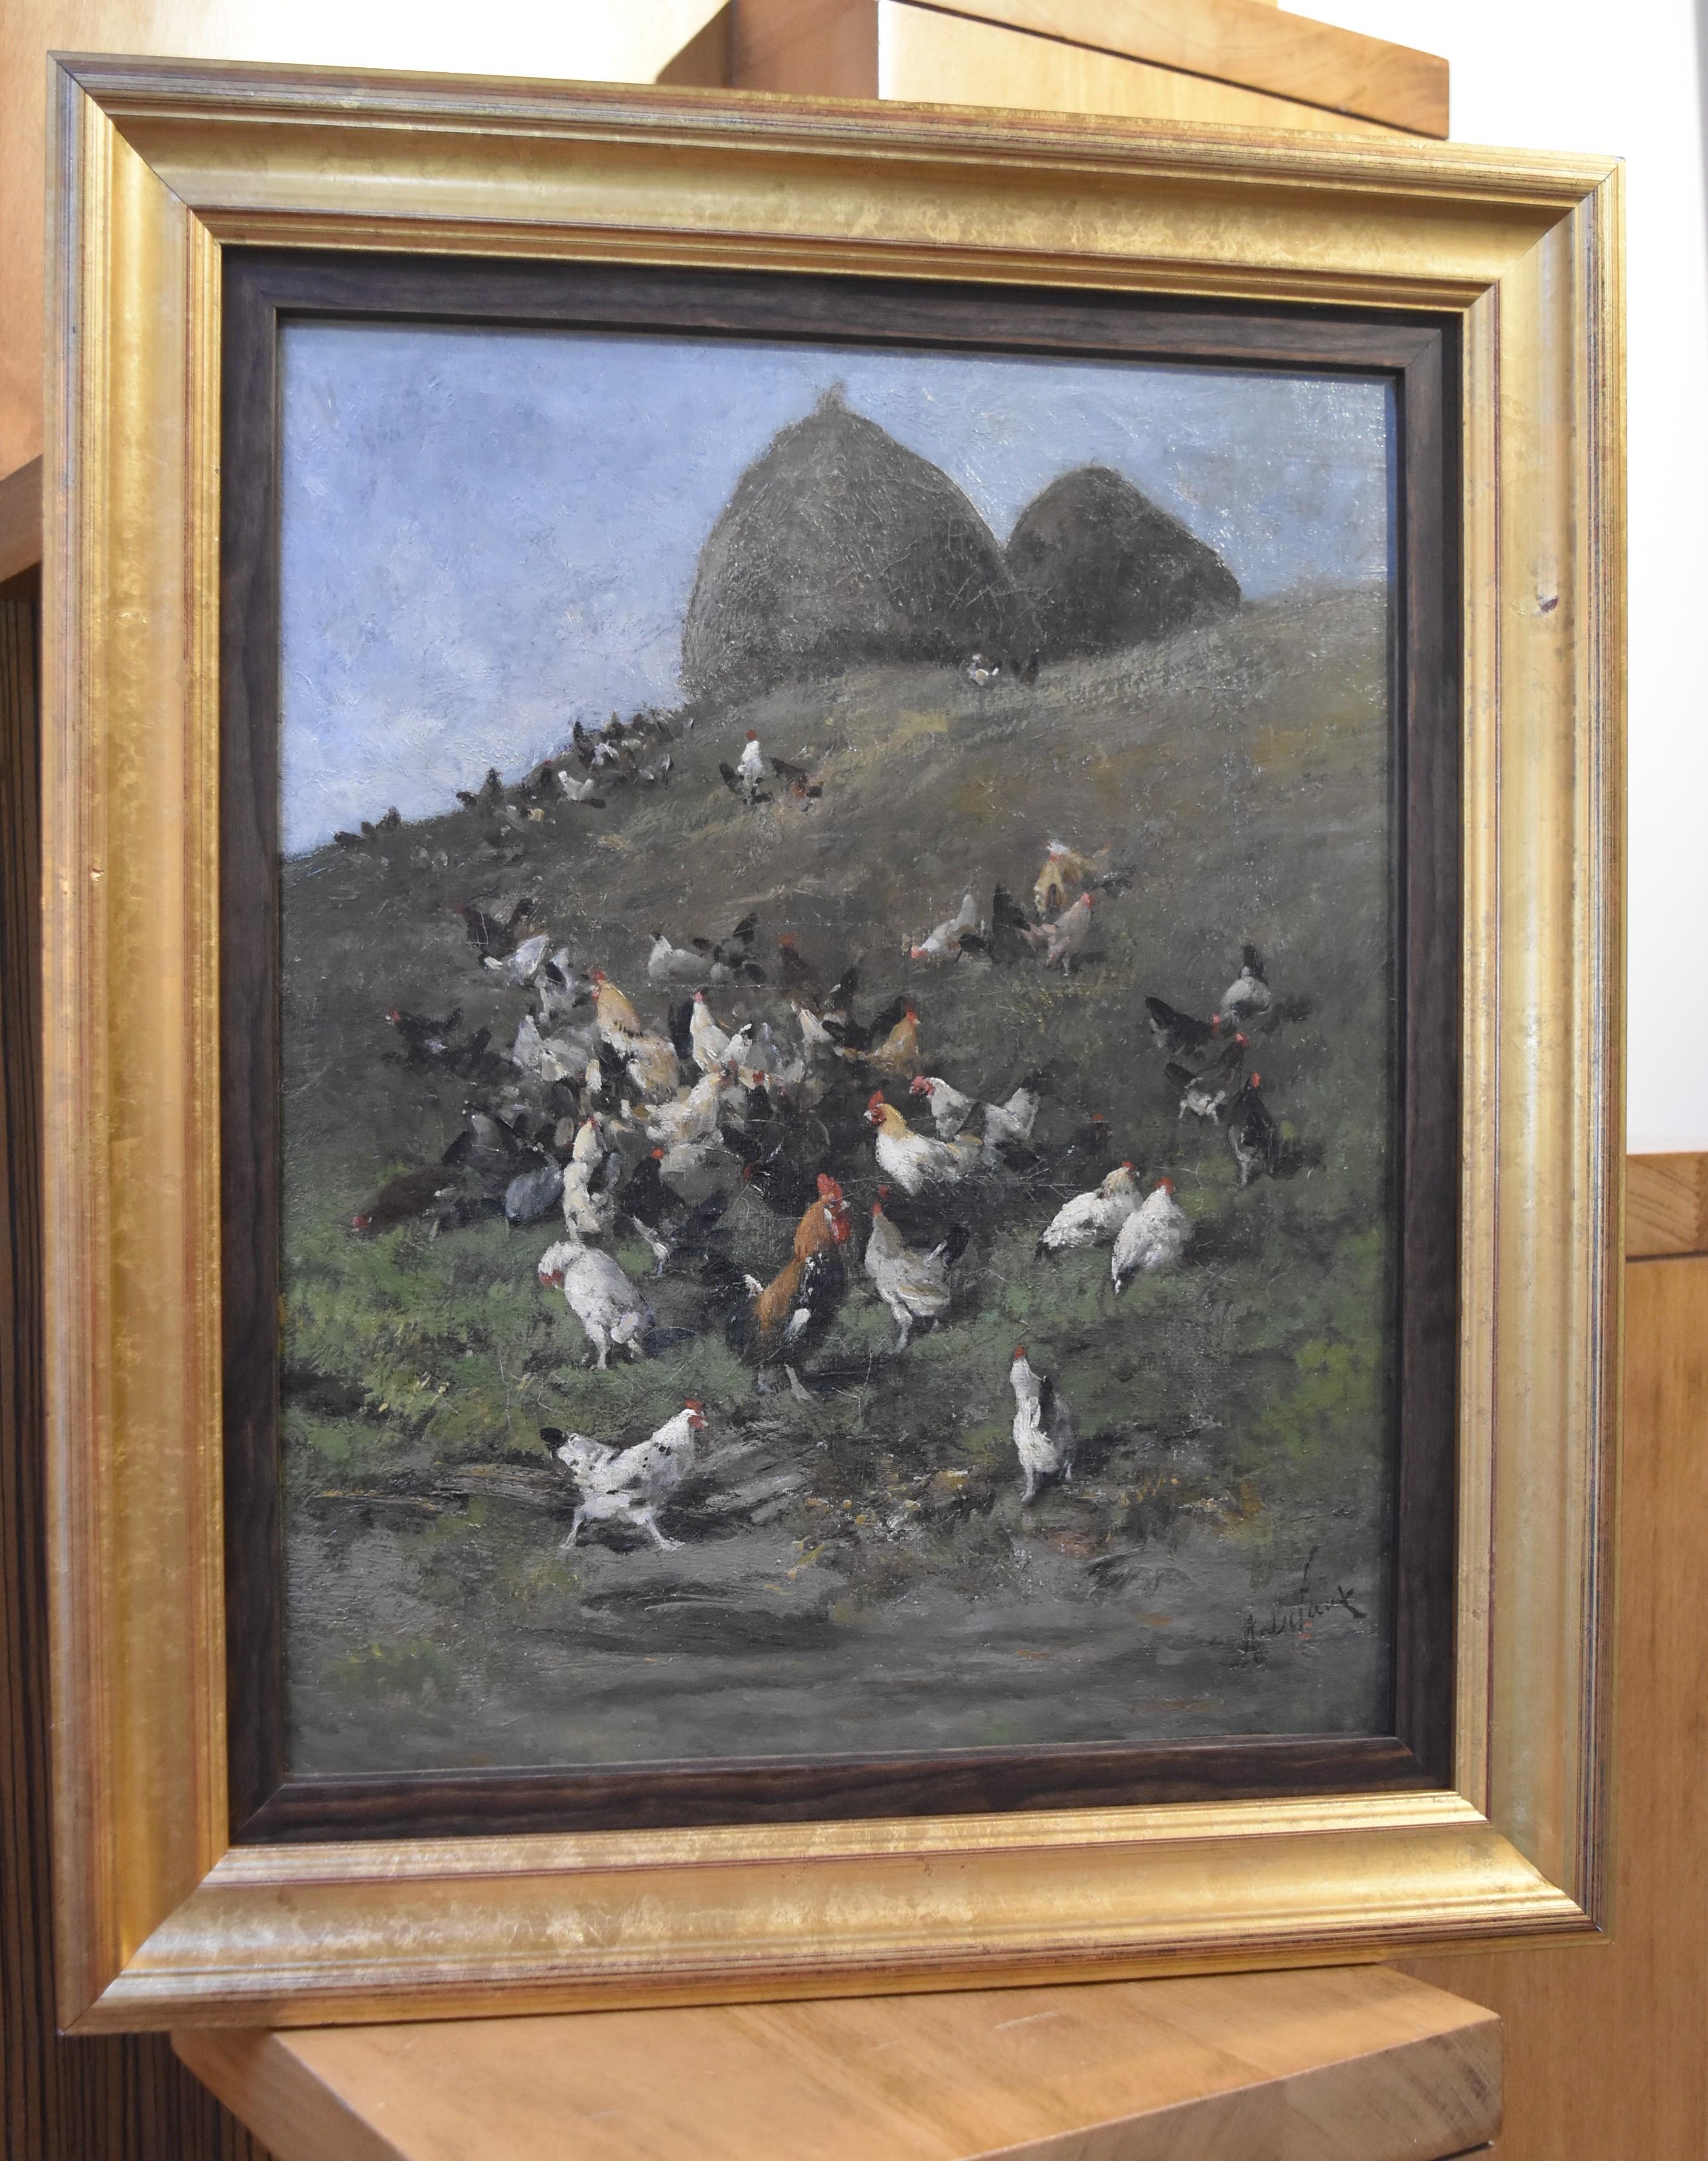 Alexandre Defaux (1826-1900) Hens and roosters in a field, signed, oil on canvas 4